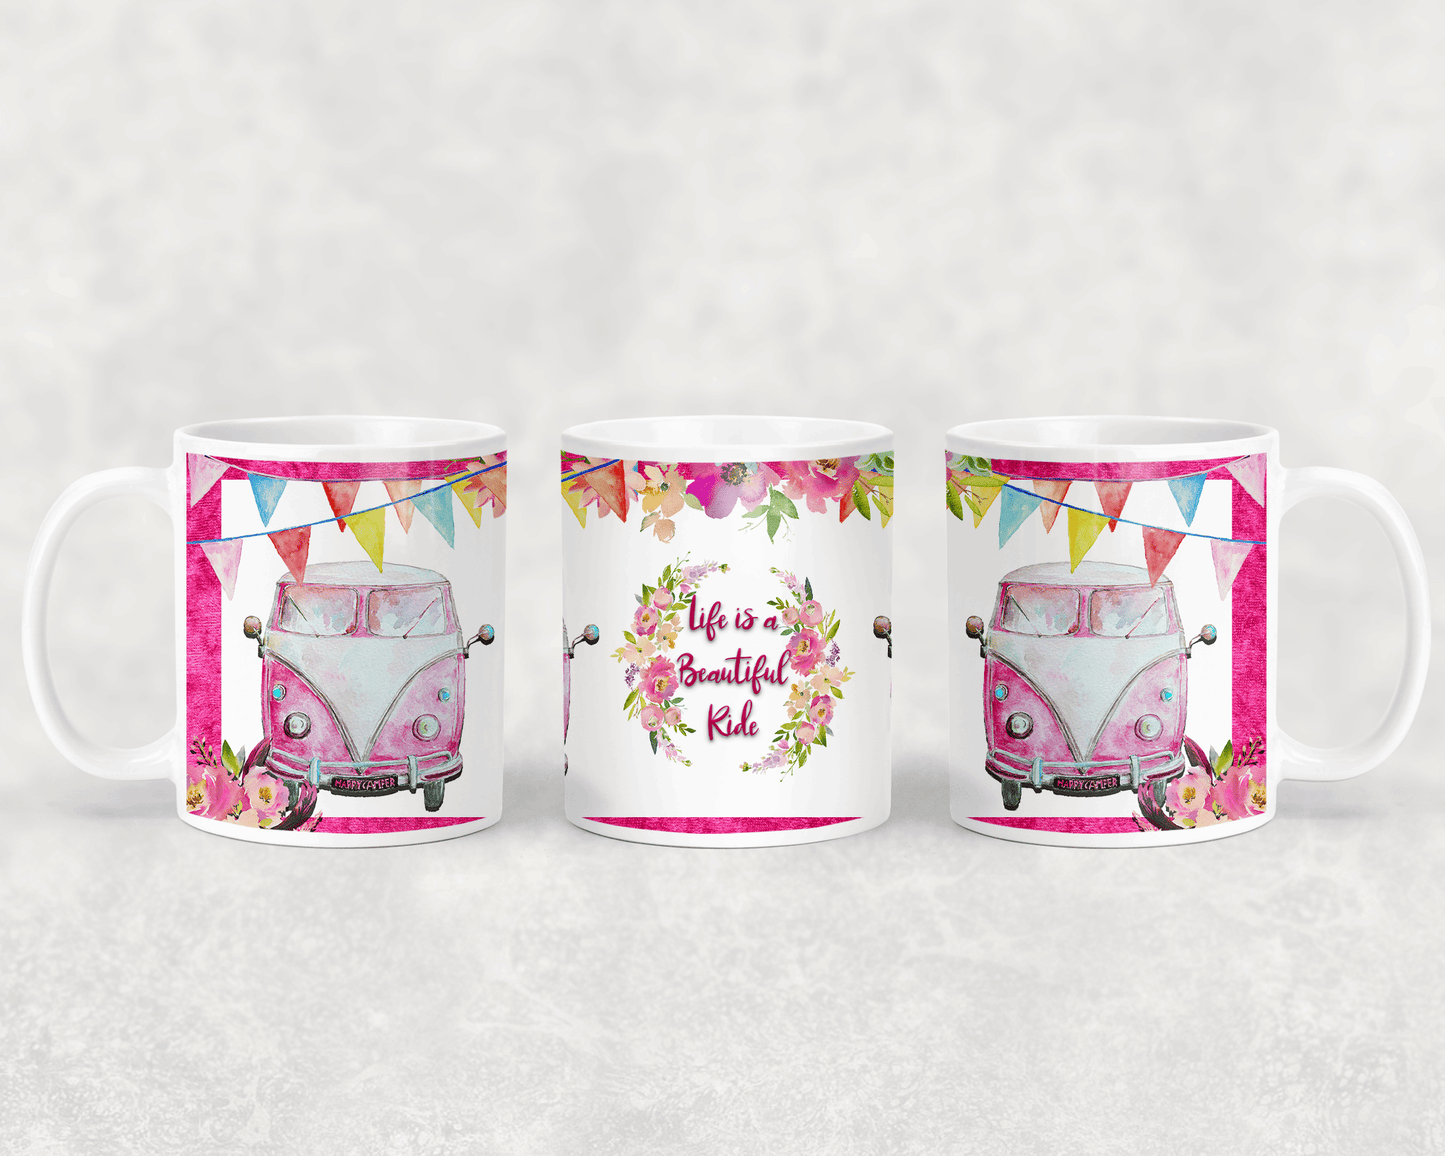  Pink Camper Life is a Beautiful Ride Mug by Free Spirit Accessories sold by Free Spirit Accessories